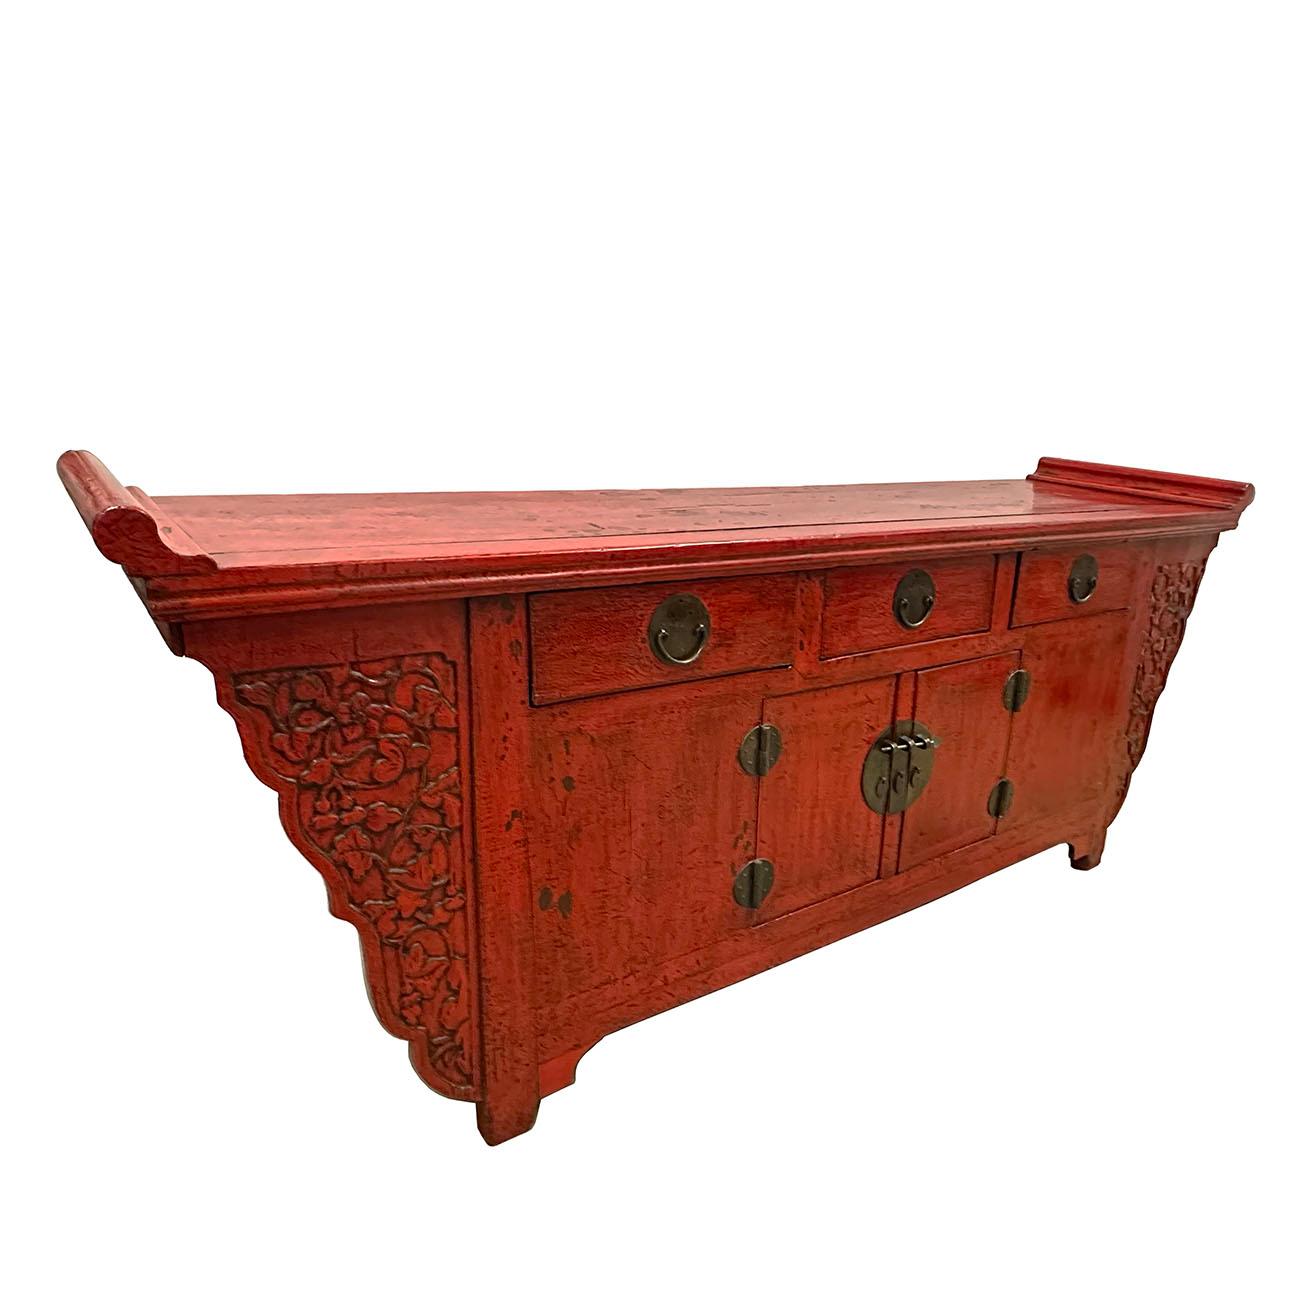 This Chinese Antique Altar Cabinet/Buffet Table was made from solid Elm wood with red lacquered finish and beautiful open carving works on both side. It featured 3 Drawers on the top, Double opening doors cabinet at the front with removable center